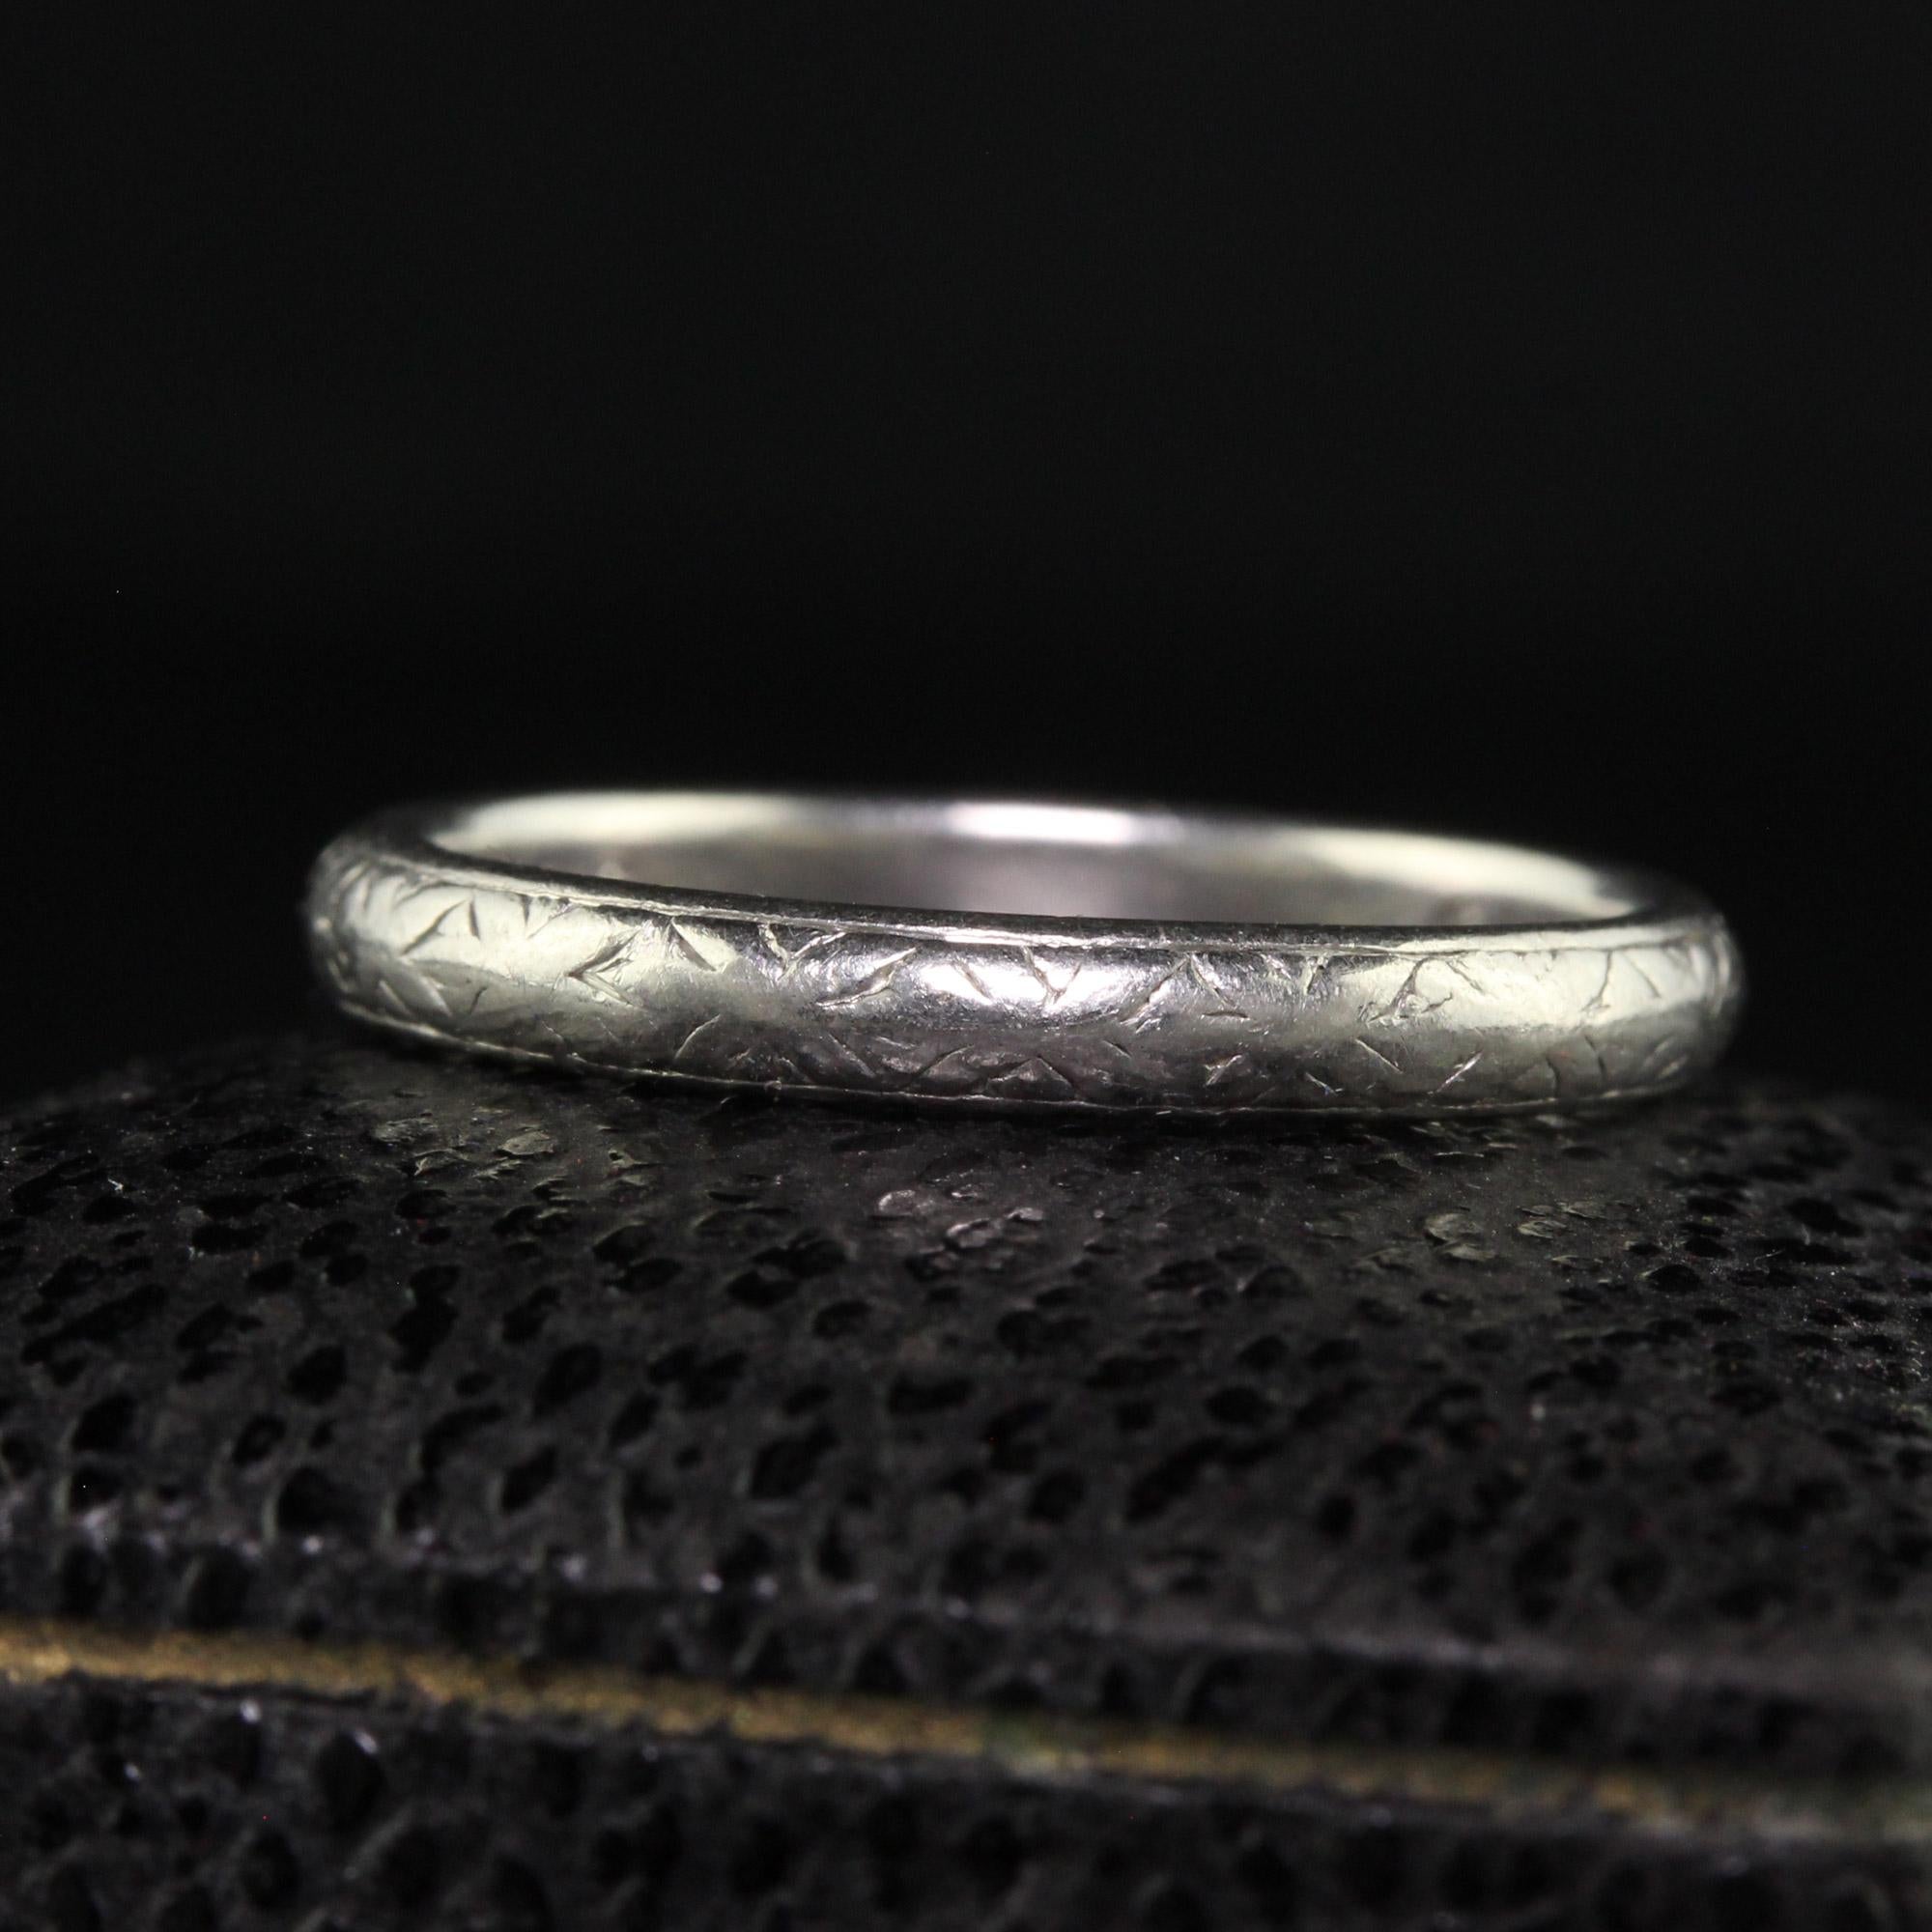 Beautiful Antique Art Deco Shreve and Co Platinum Engraved Wedding Band - Size 7. This beautiful Shreve and Co wedding band is crafted in platinum. The ring has faint engravings going around the entire ring and is in great condition. The inside of